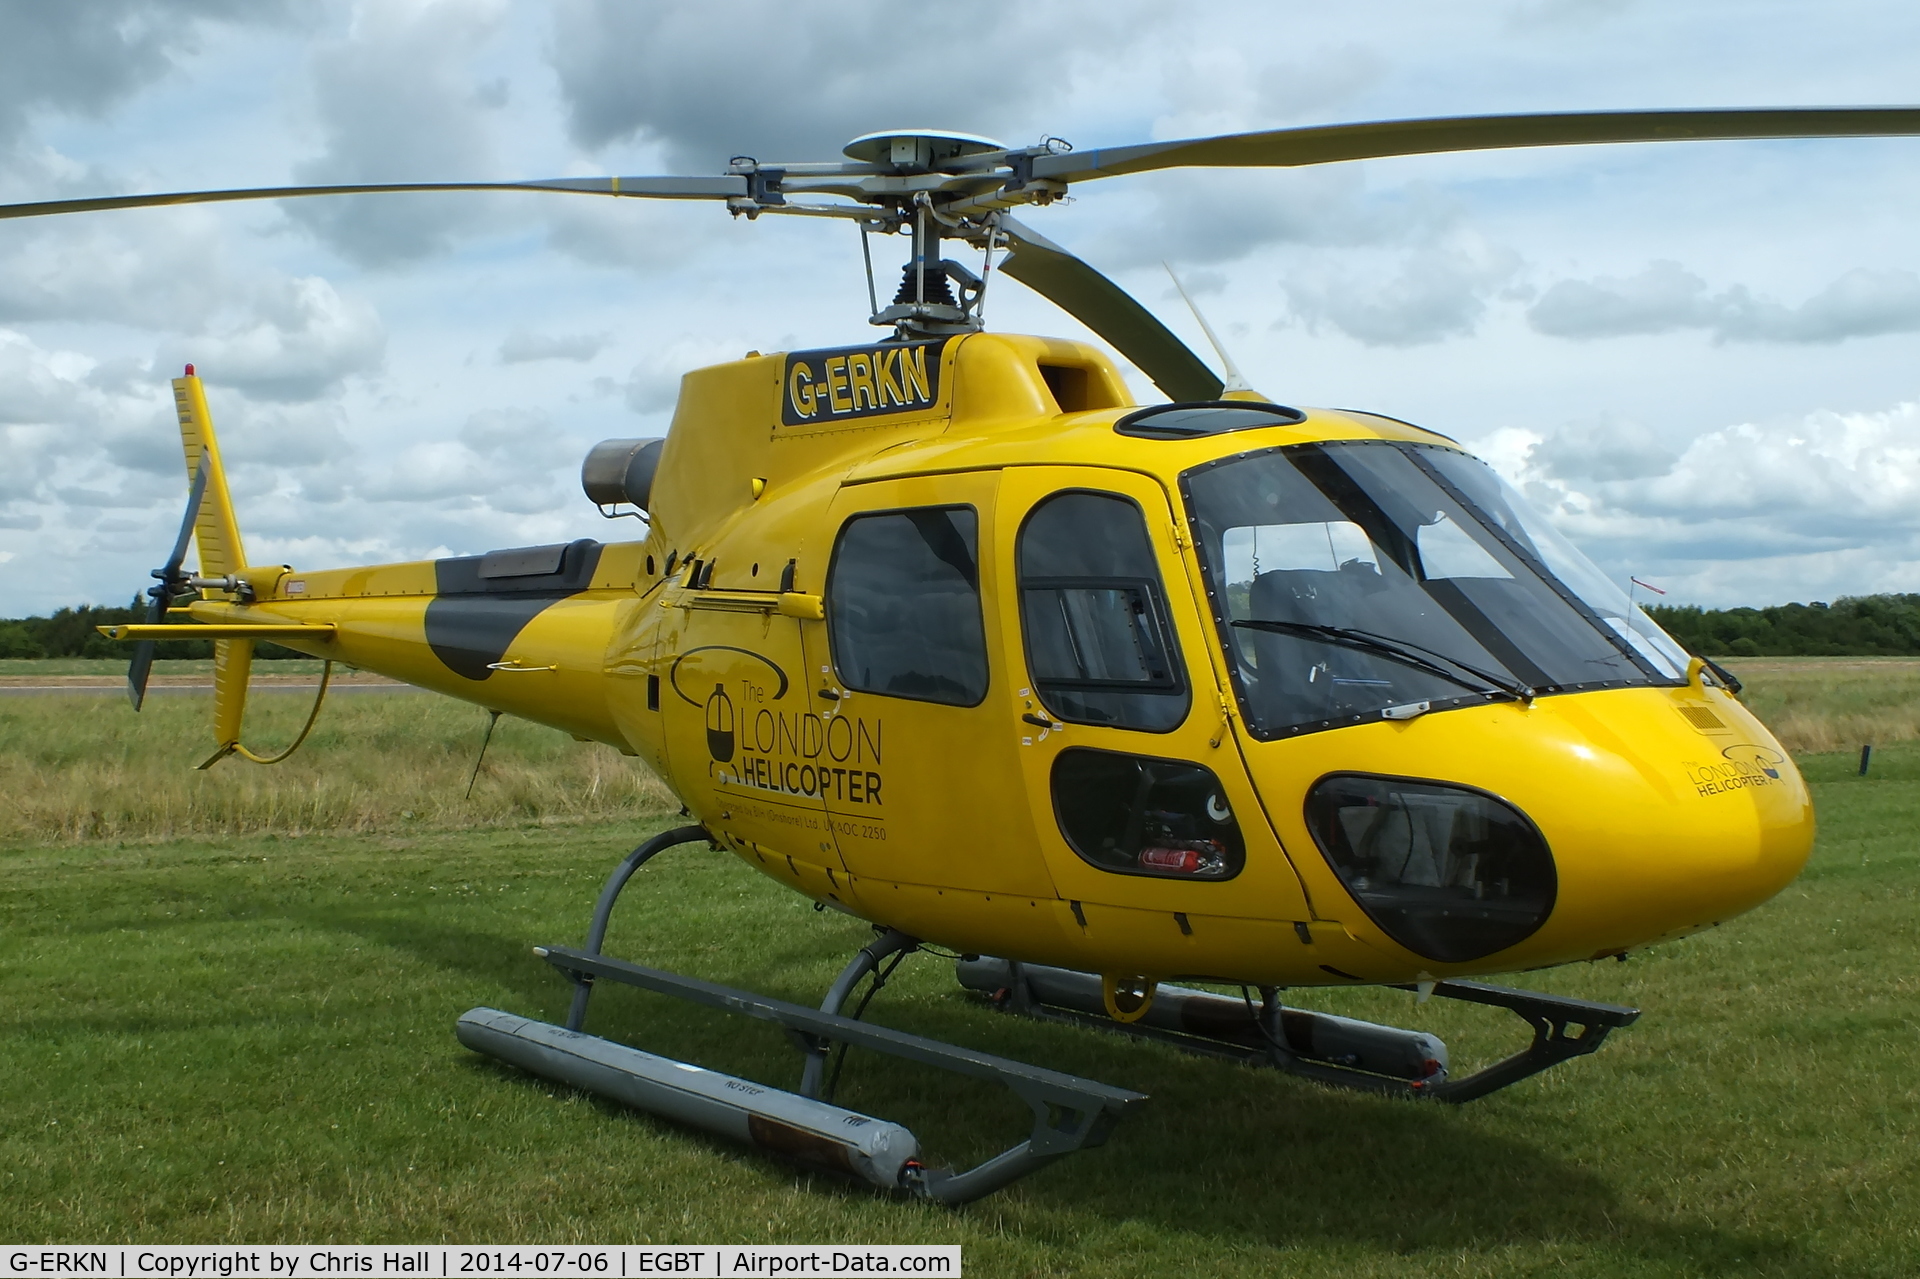 G-ERKN, 2002 Eurocopter AS-350B-3 Ecureuil Ecureuil C/N 3587, ferrying race fans to the British F1 Grand Prix at Silverstone